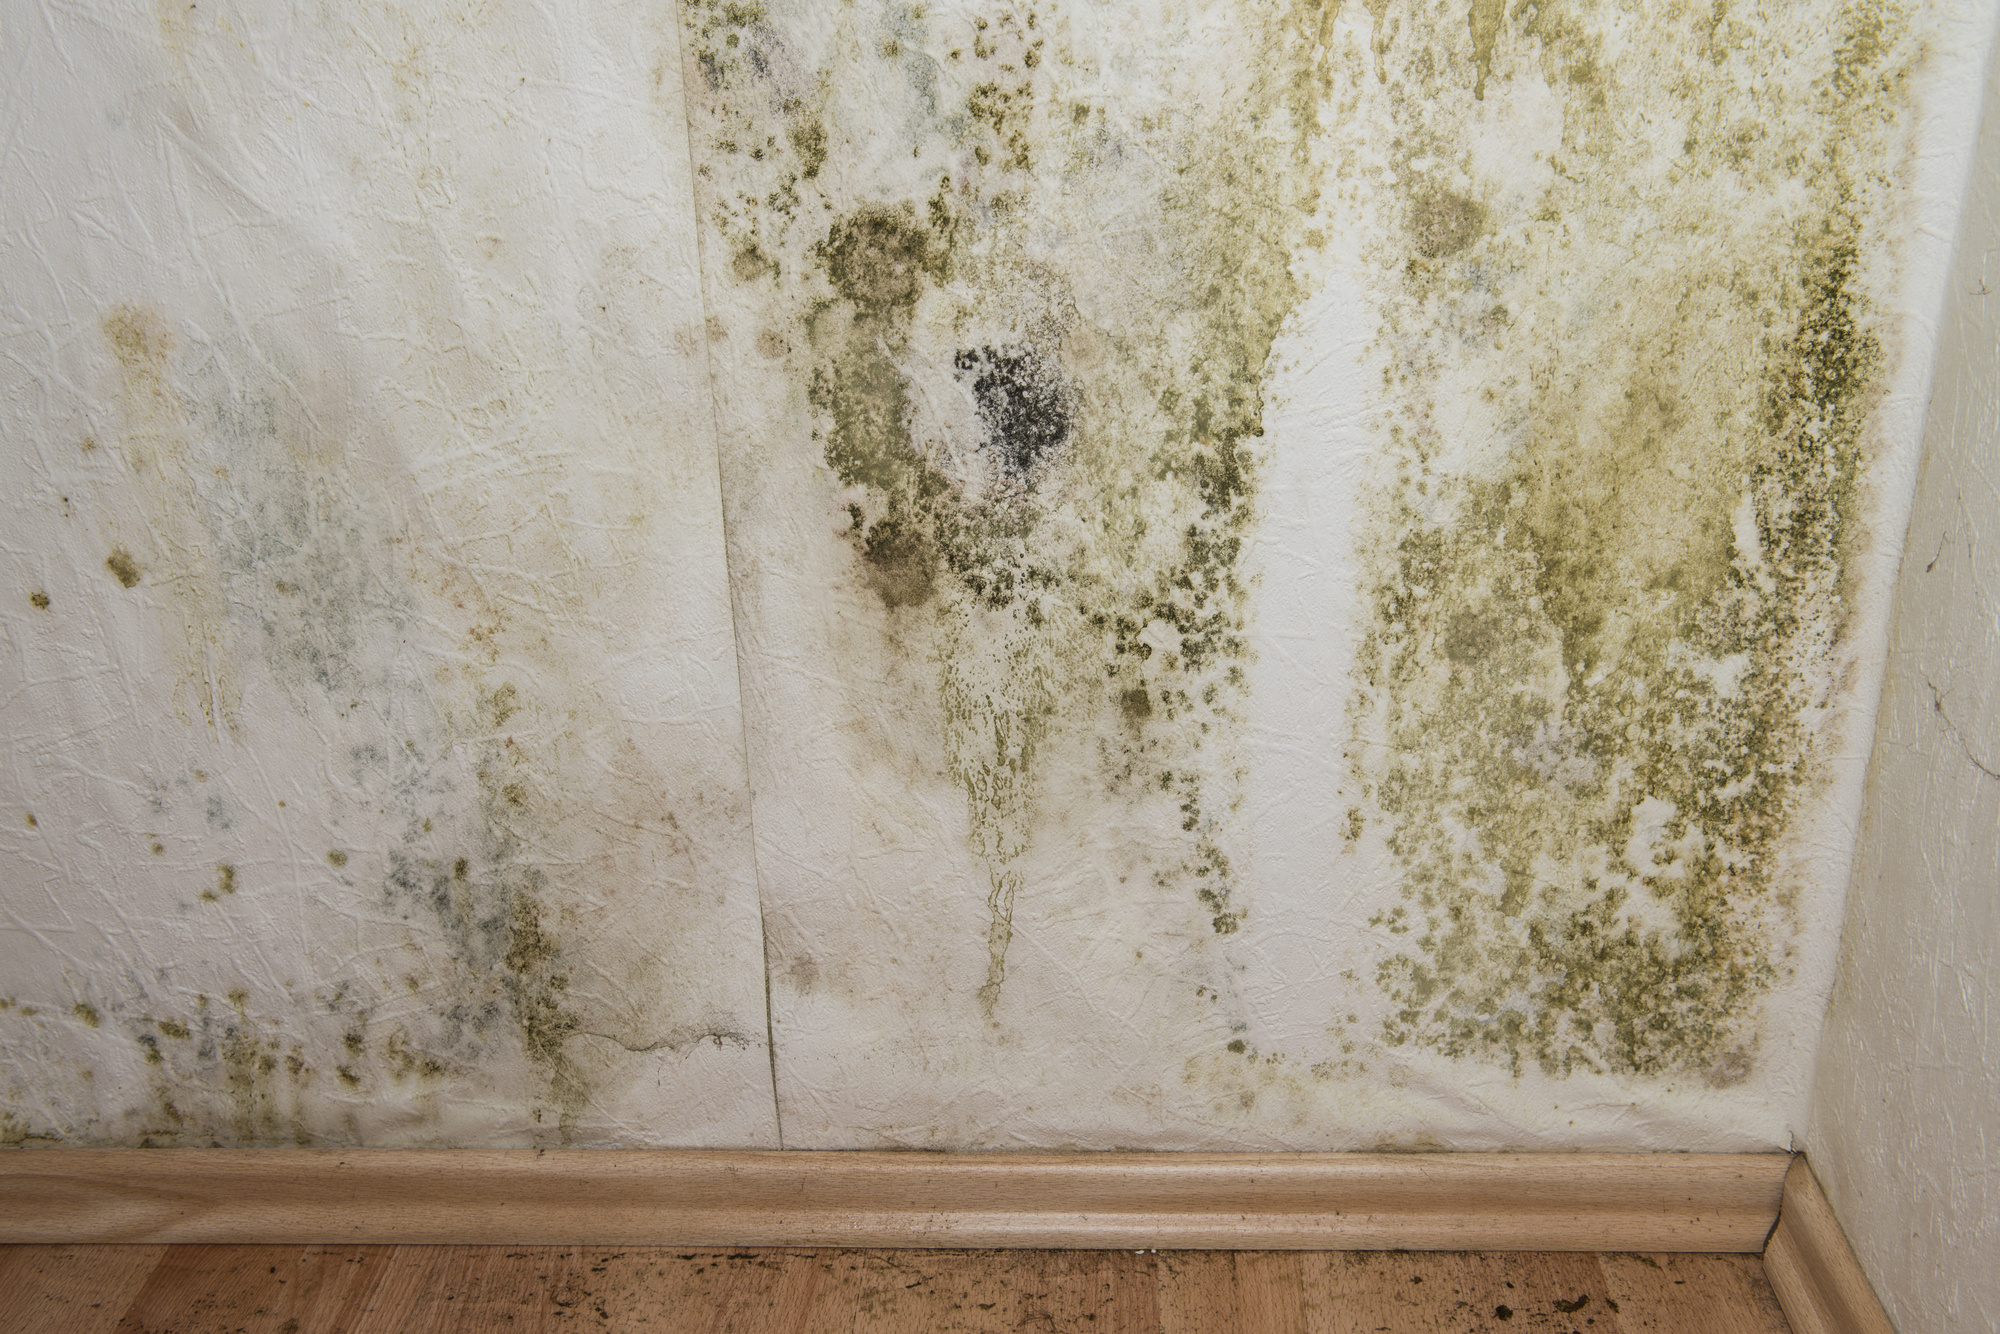 Are you concerned that you may have dangerous mold in your home? Check out this guide on how to identify mold to determine if that's the case!